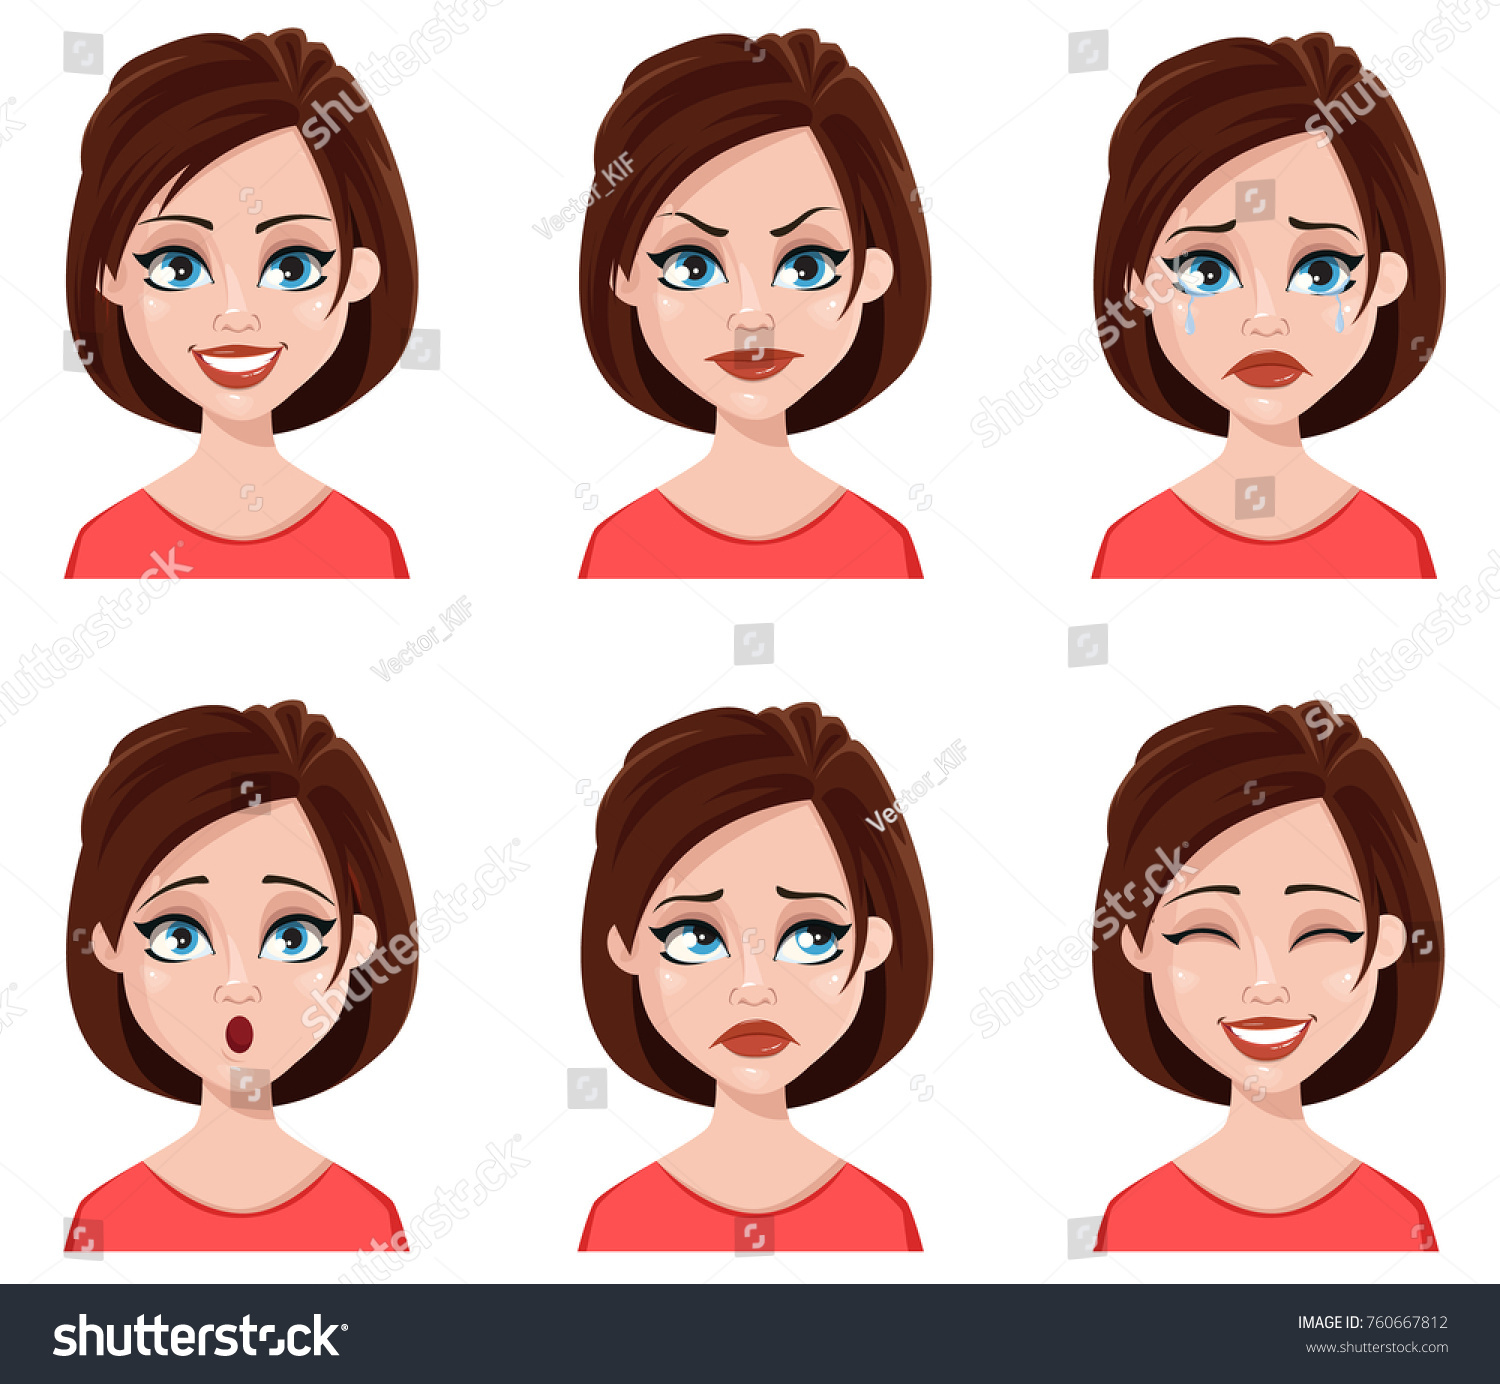 Facial Expressions Cute Woman Different Female Stock Vector Royalty Free 760667812 Shutterstock 